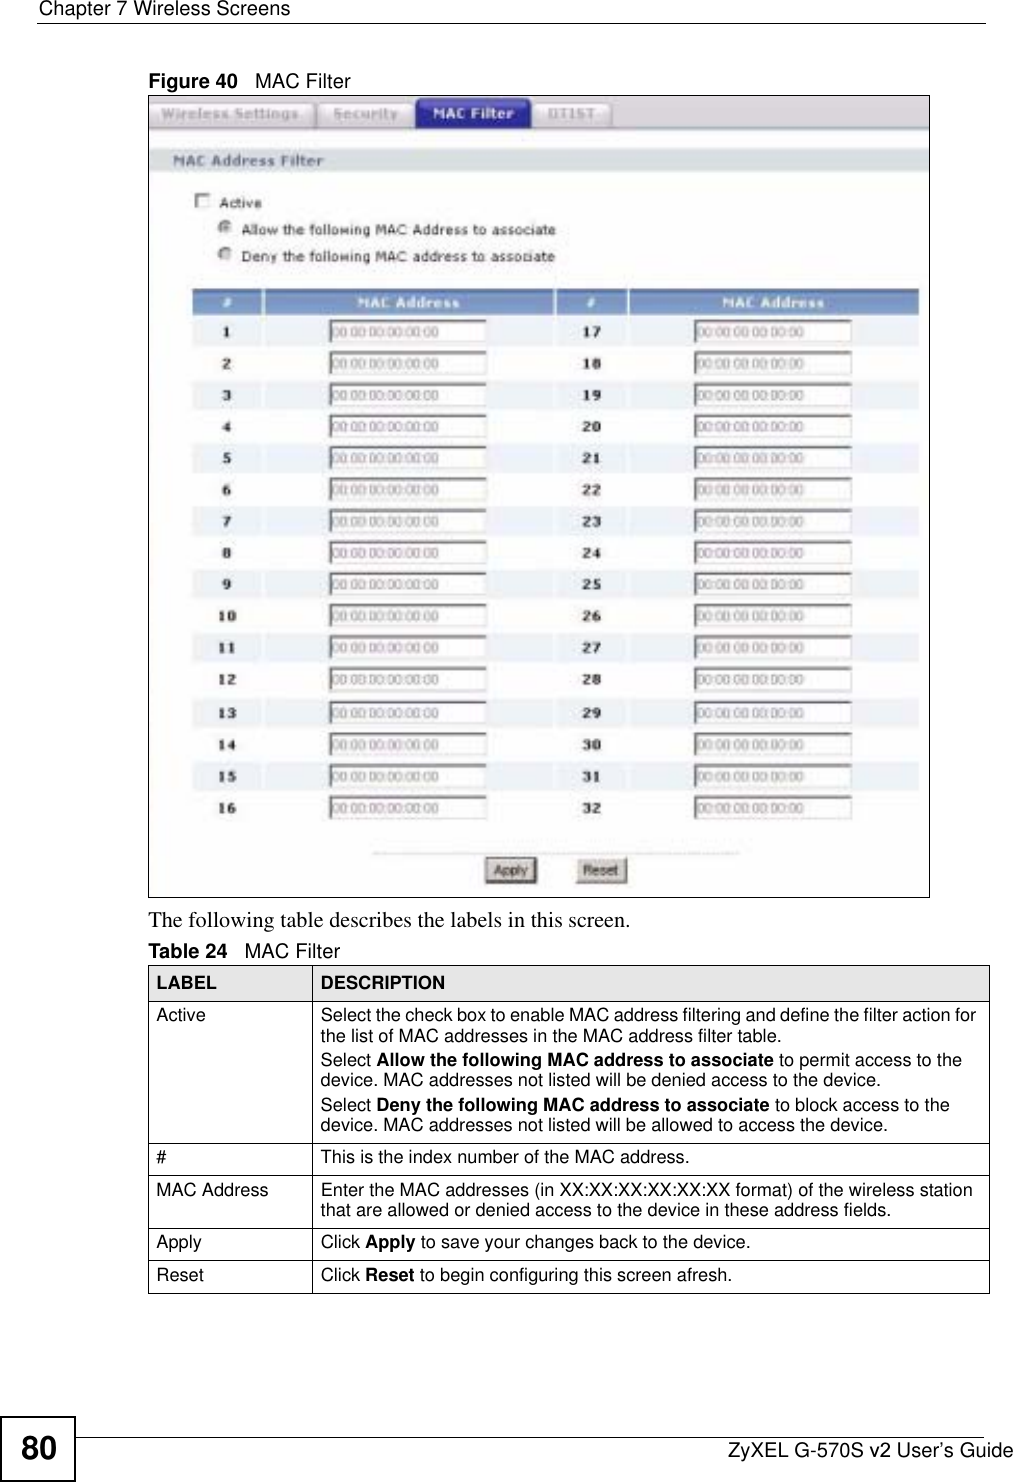 Chapter 7 Wireless ScreensZyXEL G-570S v2 User’s Guide80Figure 40   MAC FilterThe following table describes the labels in this screen.Table 24   MAC FilterLABEL DESCRIPTIONActive Select the check box to enable MAC address filtering and define the filter action for the list of MAC addresses in the MAC address filter table. Select Allow the following MAC address to associate to permit access to the device. MAC addresses not listed will be denied access to the device.Select Deny the following MAC address to associate to block access to the device. MAC addresses not listed will be allowed to access the device.# This is the index number of the MAC address.MAC Address Enter the MAC addresses (in XX:XX:XX:XX:XX:XX format) of the wireless station that are allowed or denied access to the device in these address fields.Apply Click Apply to save your changes back to the device.Reset Click Reset to begin configuring this screen afresh.